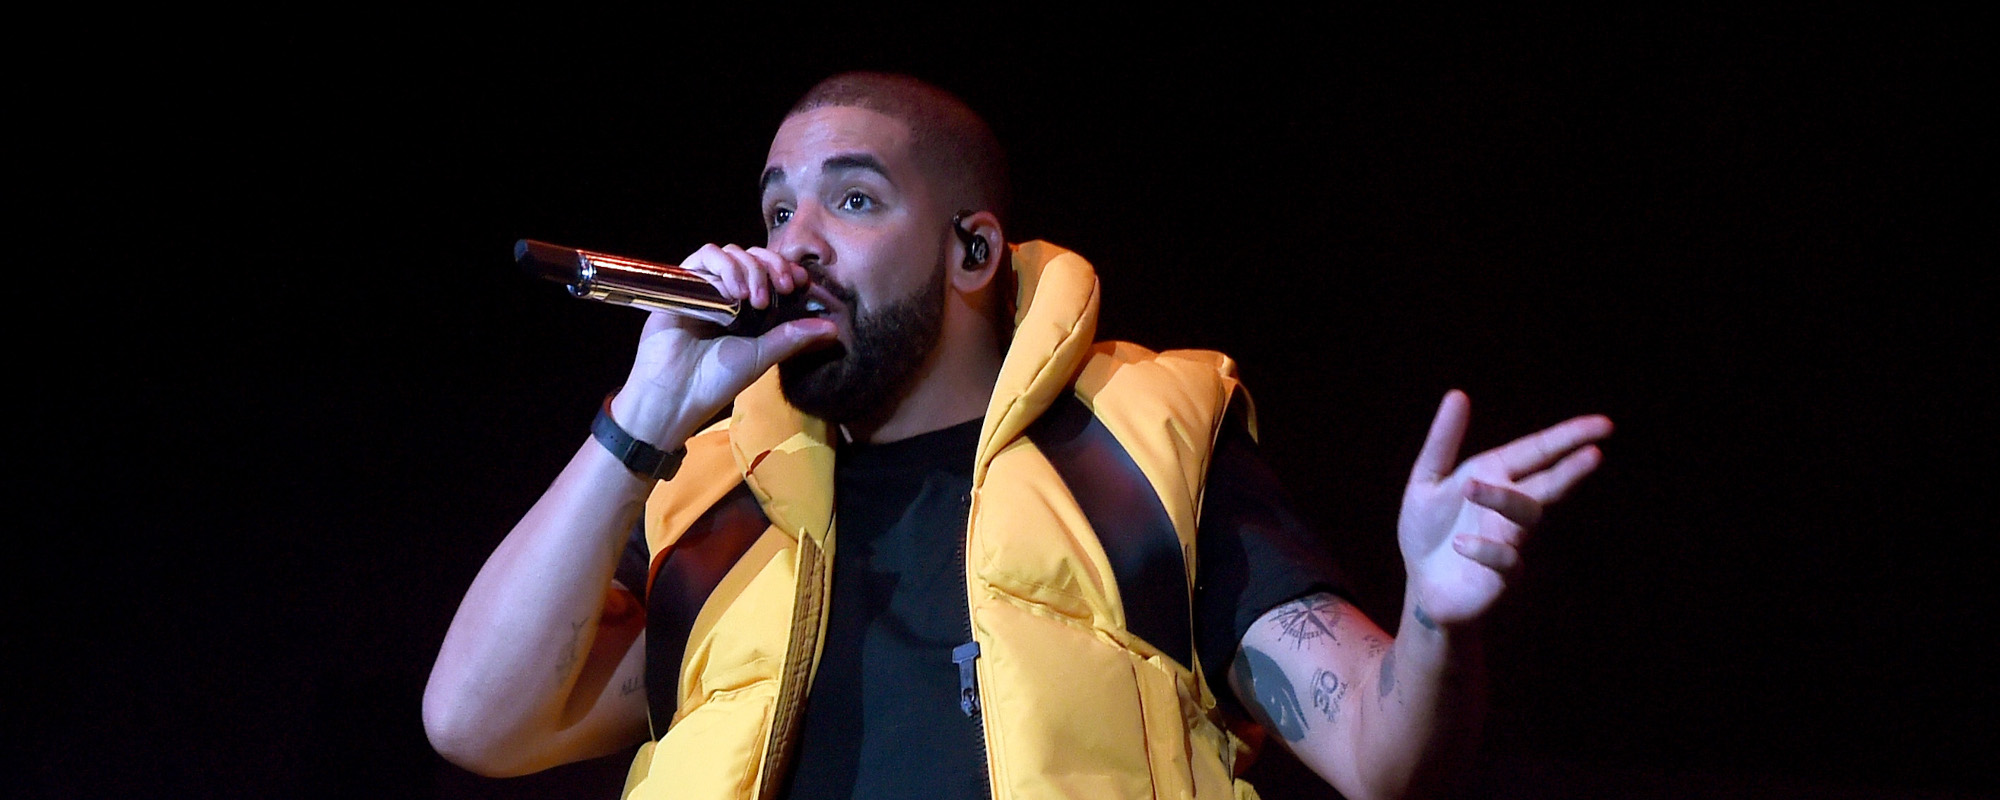 Drake Acknowledges Taylor Swift’s Industry Influence in “Red Button” Lyrics